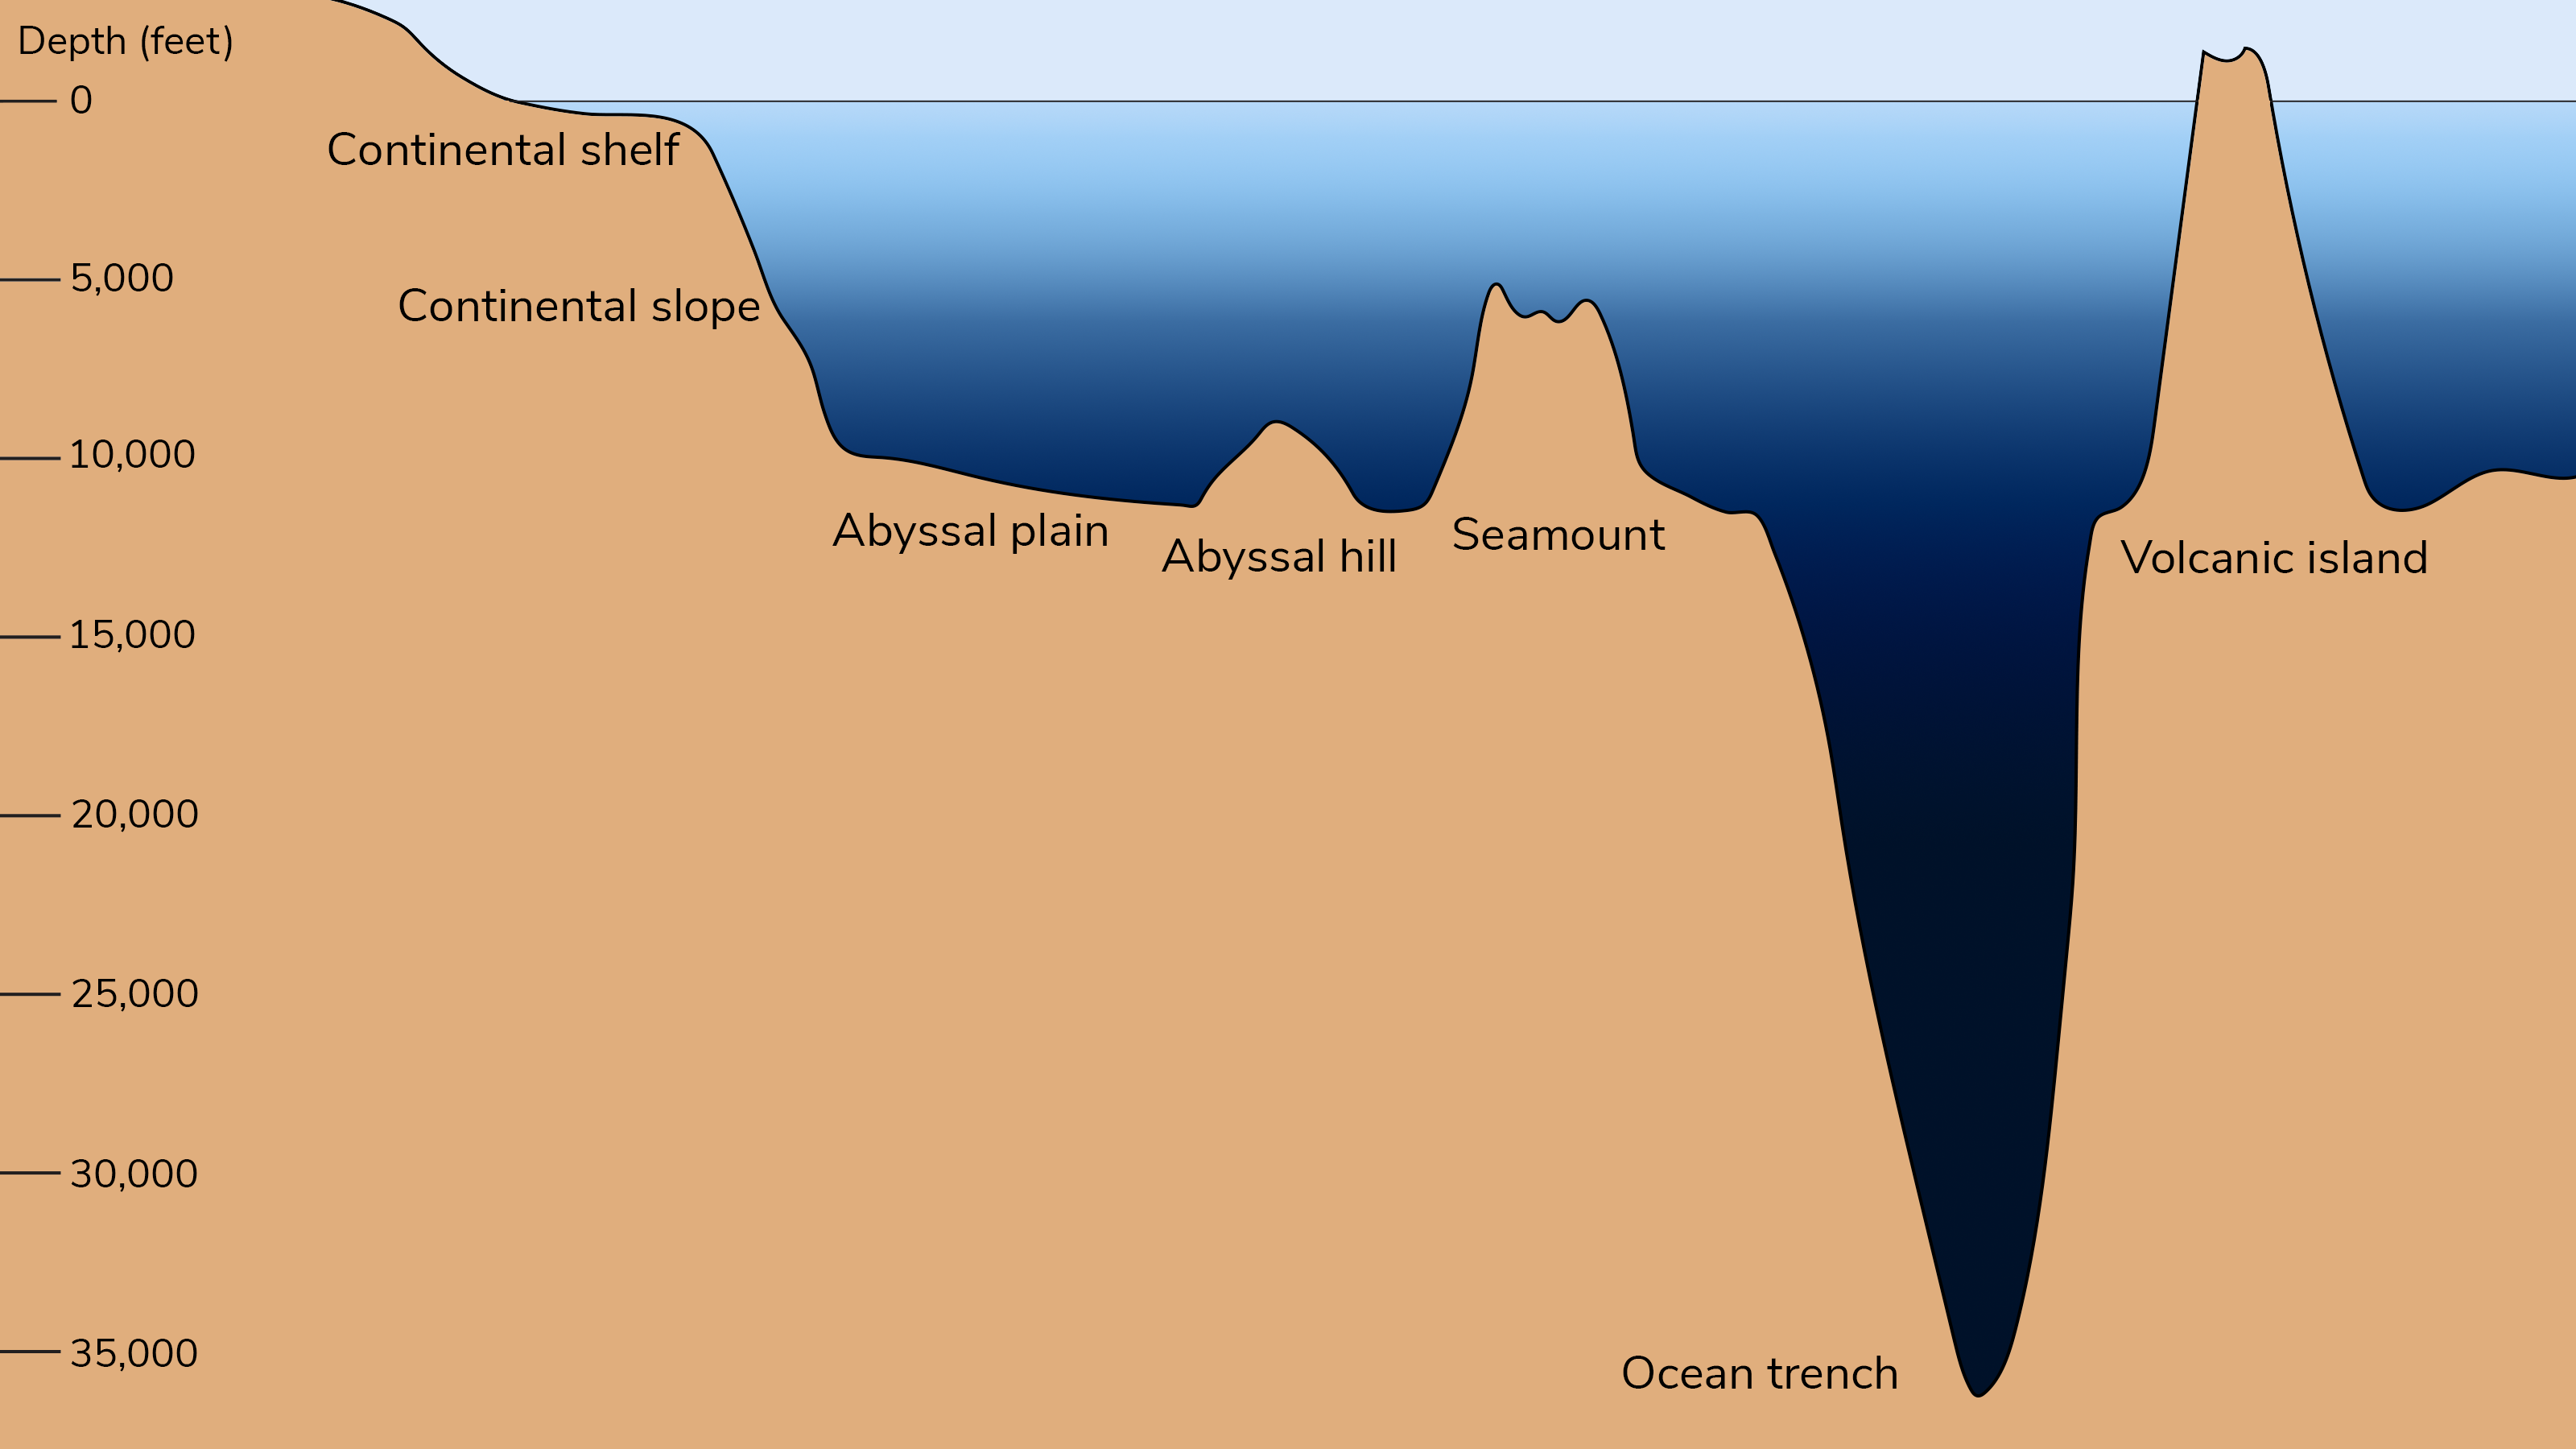 This graphic shows several ocean floor features on a scale from 0-35,000 feet below sea level. The following features are shown at example depths to scale, though each feature has a considerable range at which it may occur: continental shelf (300 feet), continental slope (300-10,000 feet), abyssal plain (>10,000 feet), abyssal hill (3,000 feet up from the abyssal plain), seamount (6,000 feet up from the abyssal plain), ocean trench (36,000 feet), and volcanic island (above sea level). 